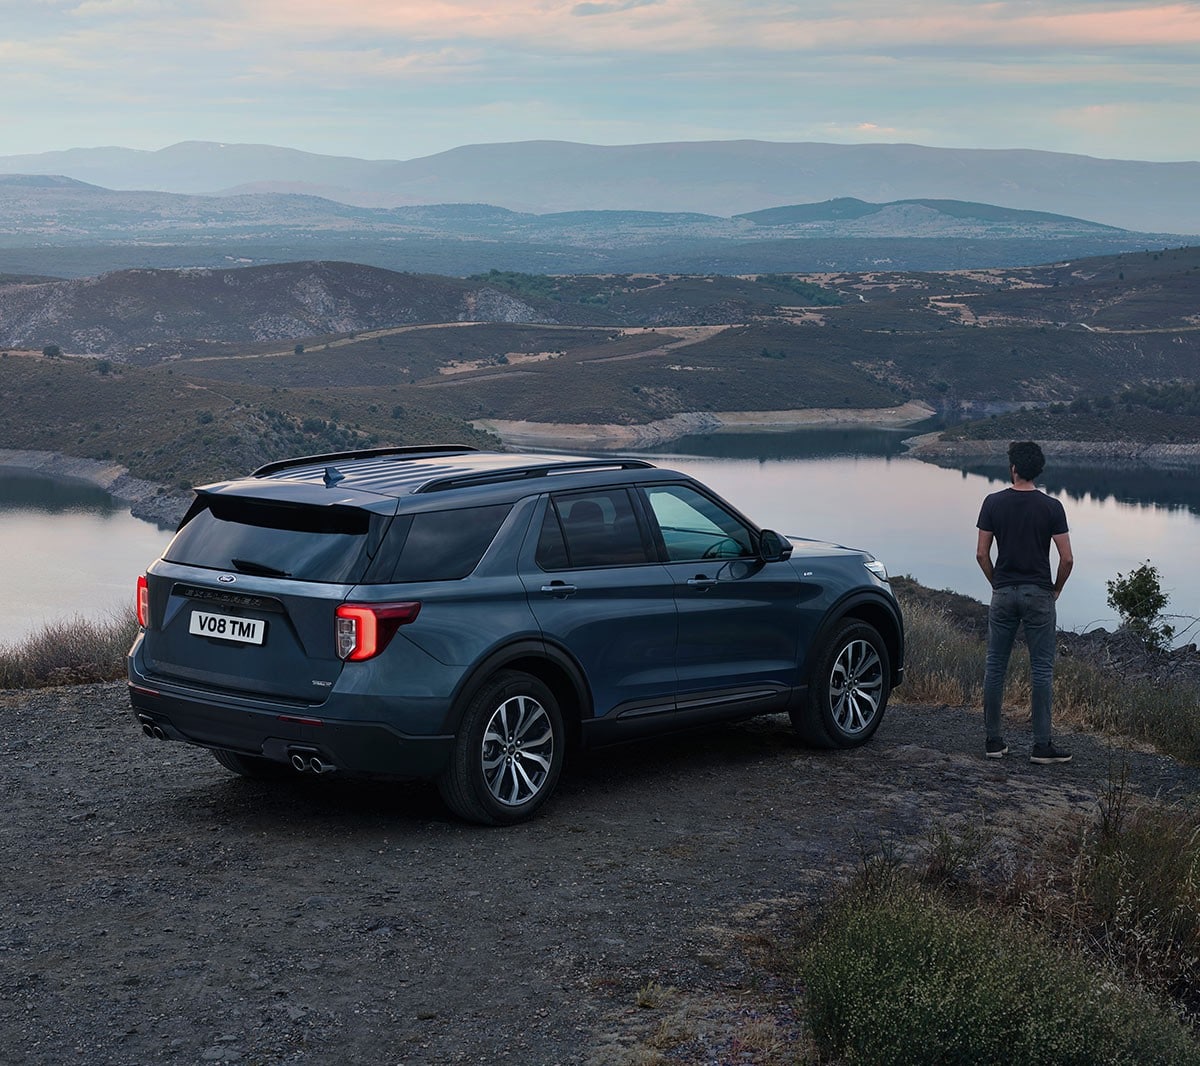 Ford Explorer parked in hilly area above lakes with person standing next to it overlooking landscape